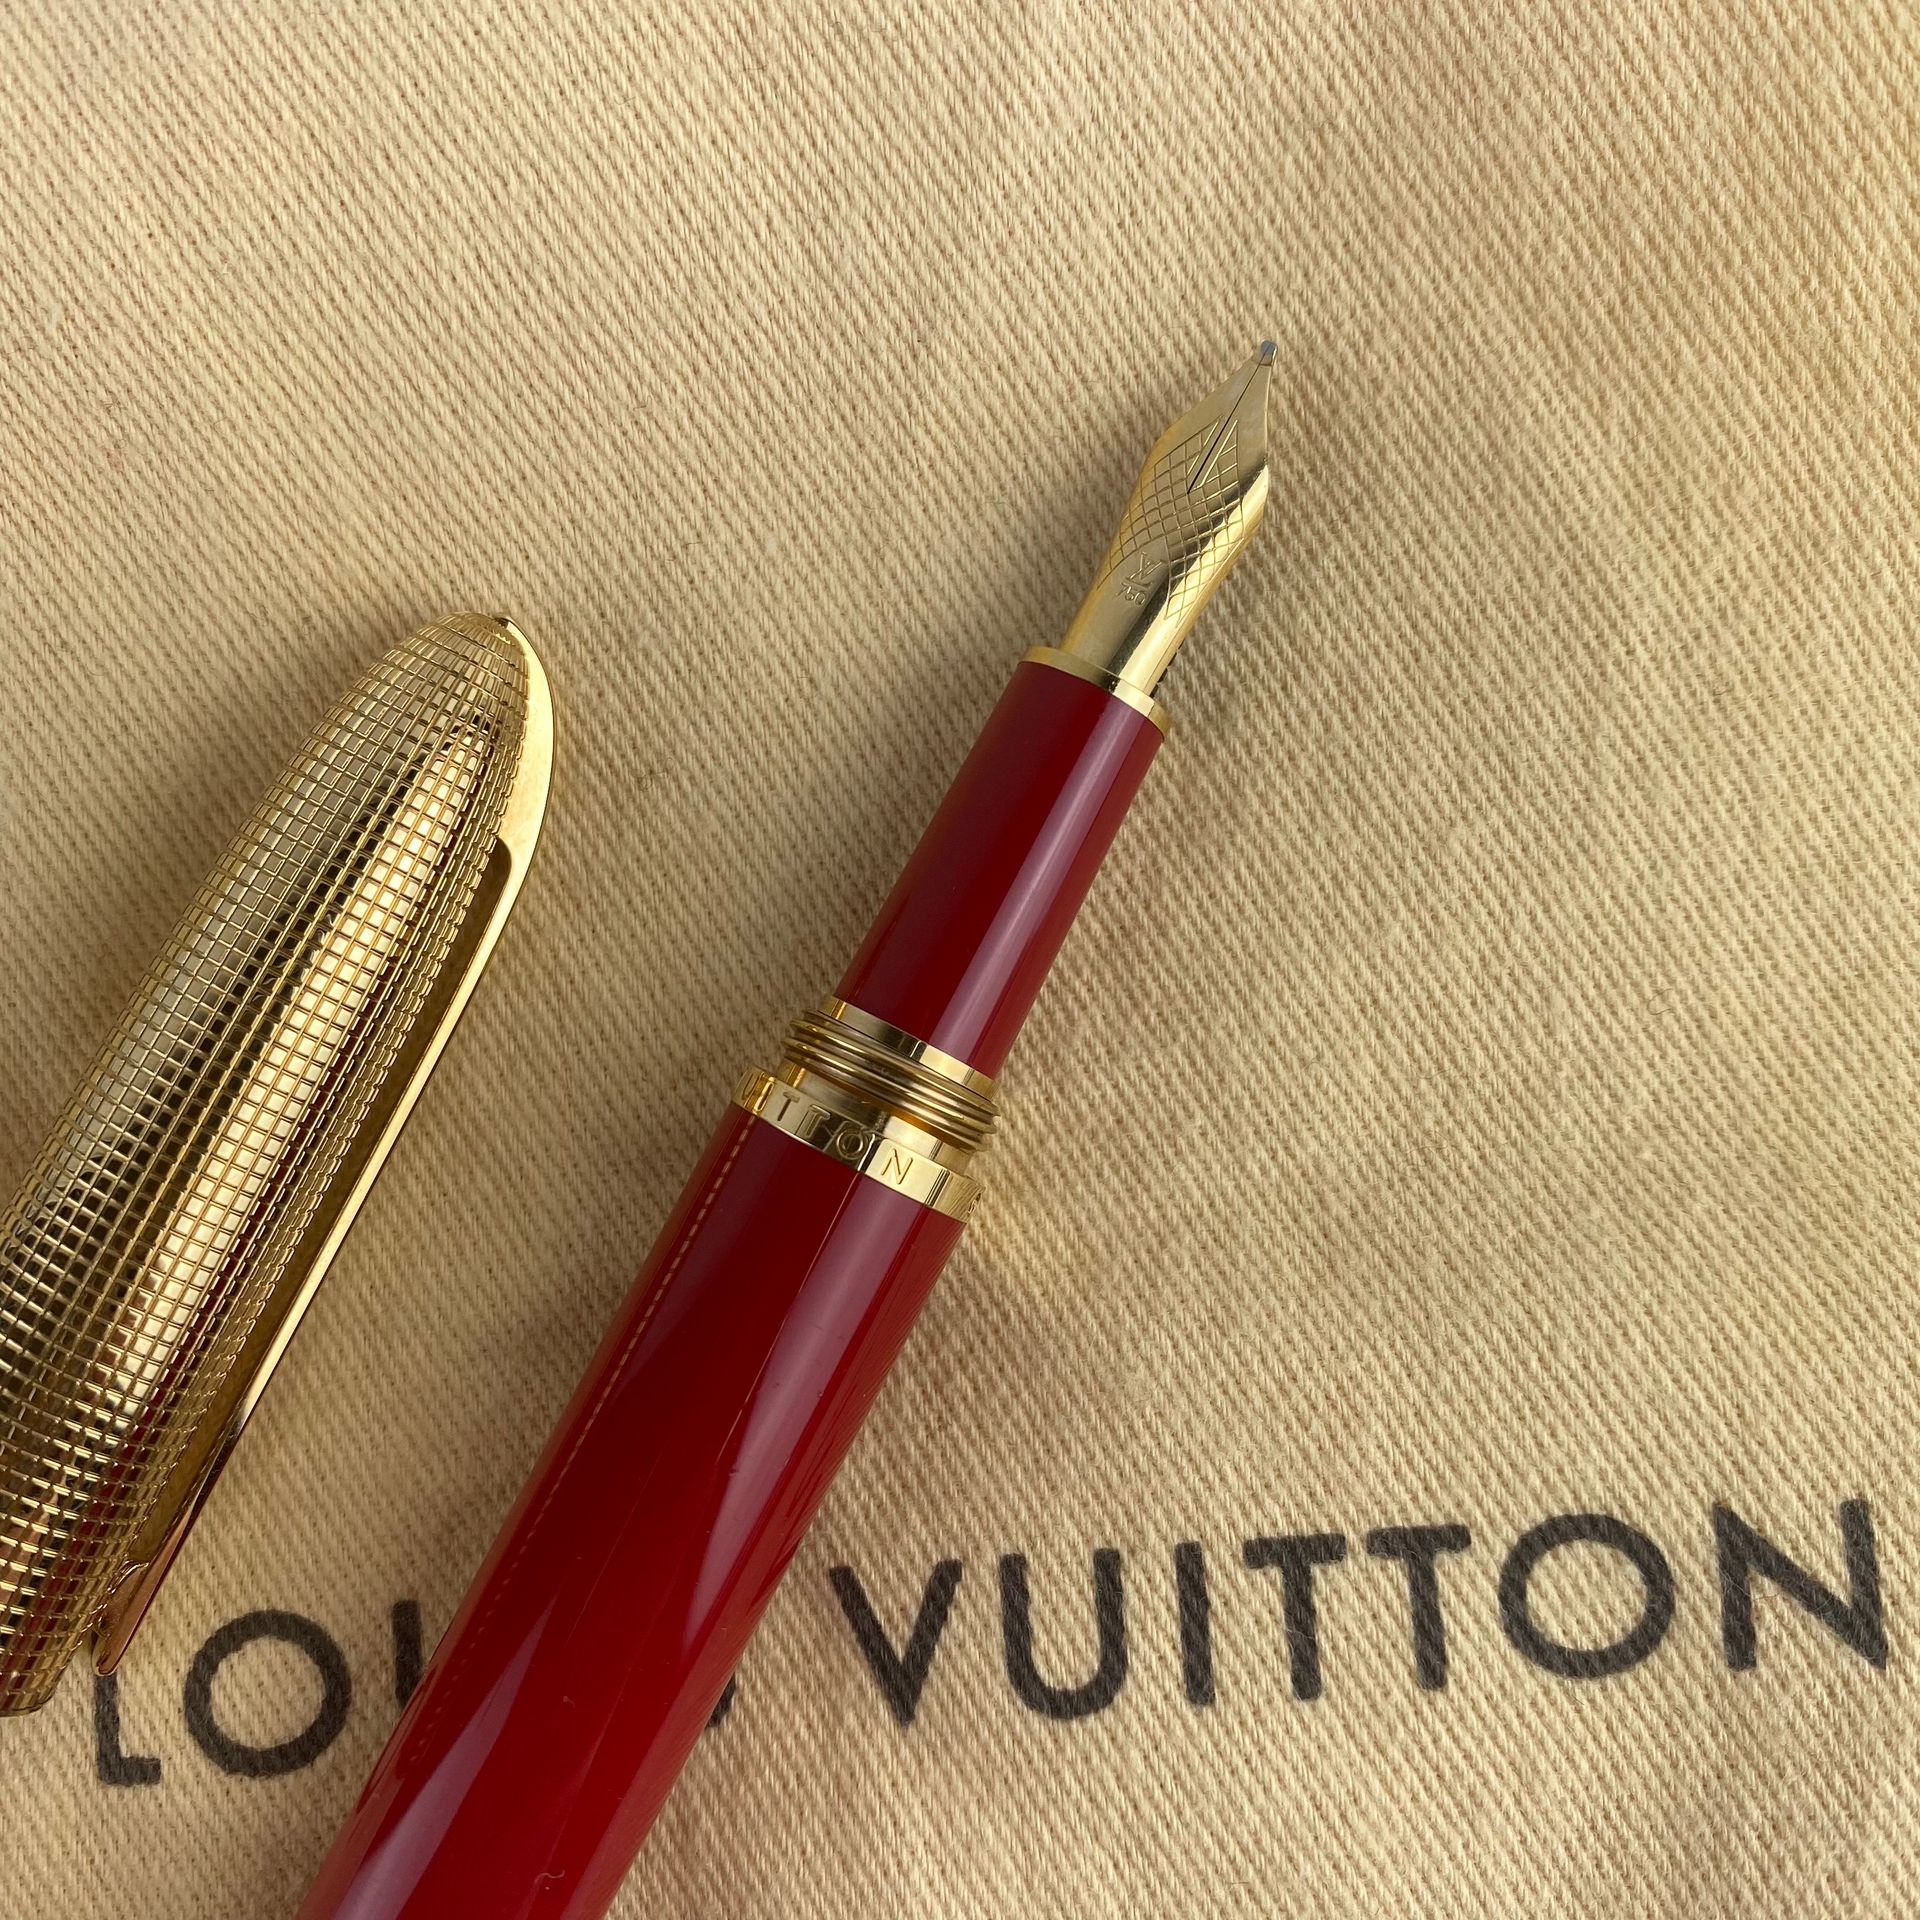 Fountain pen LOUIS VUITTON red lacquer and gold trim, go…